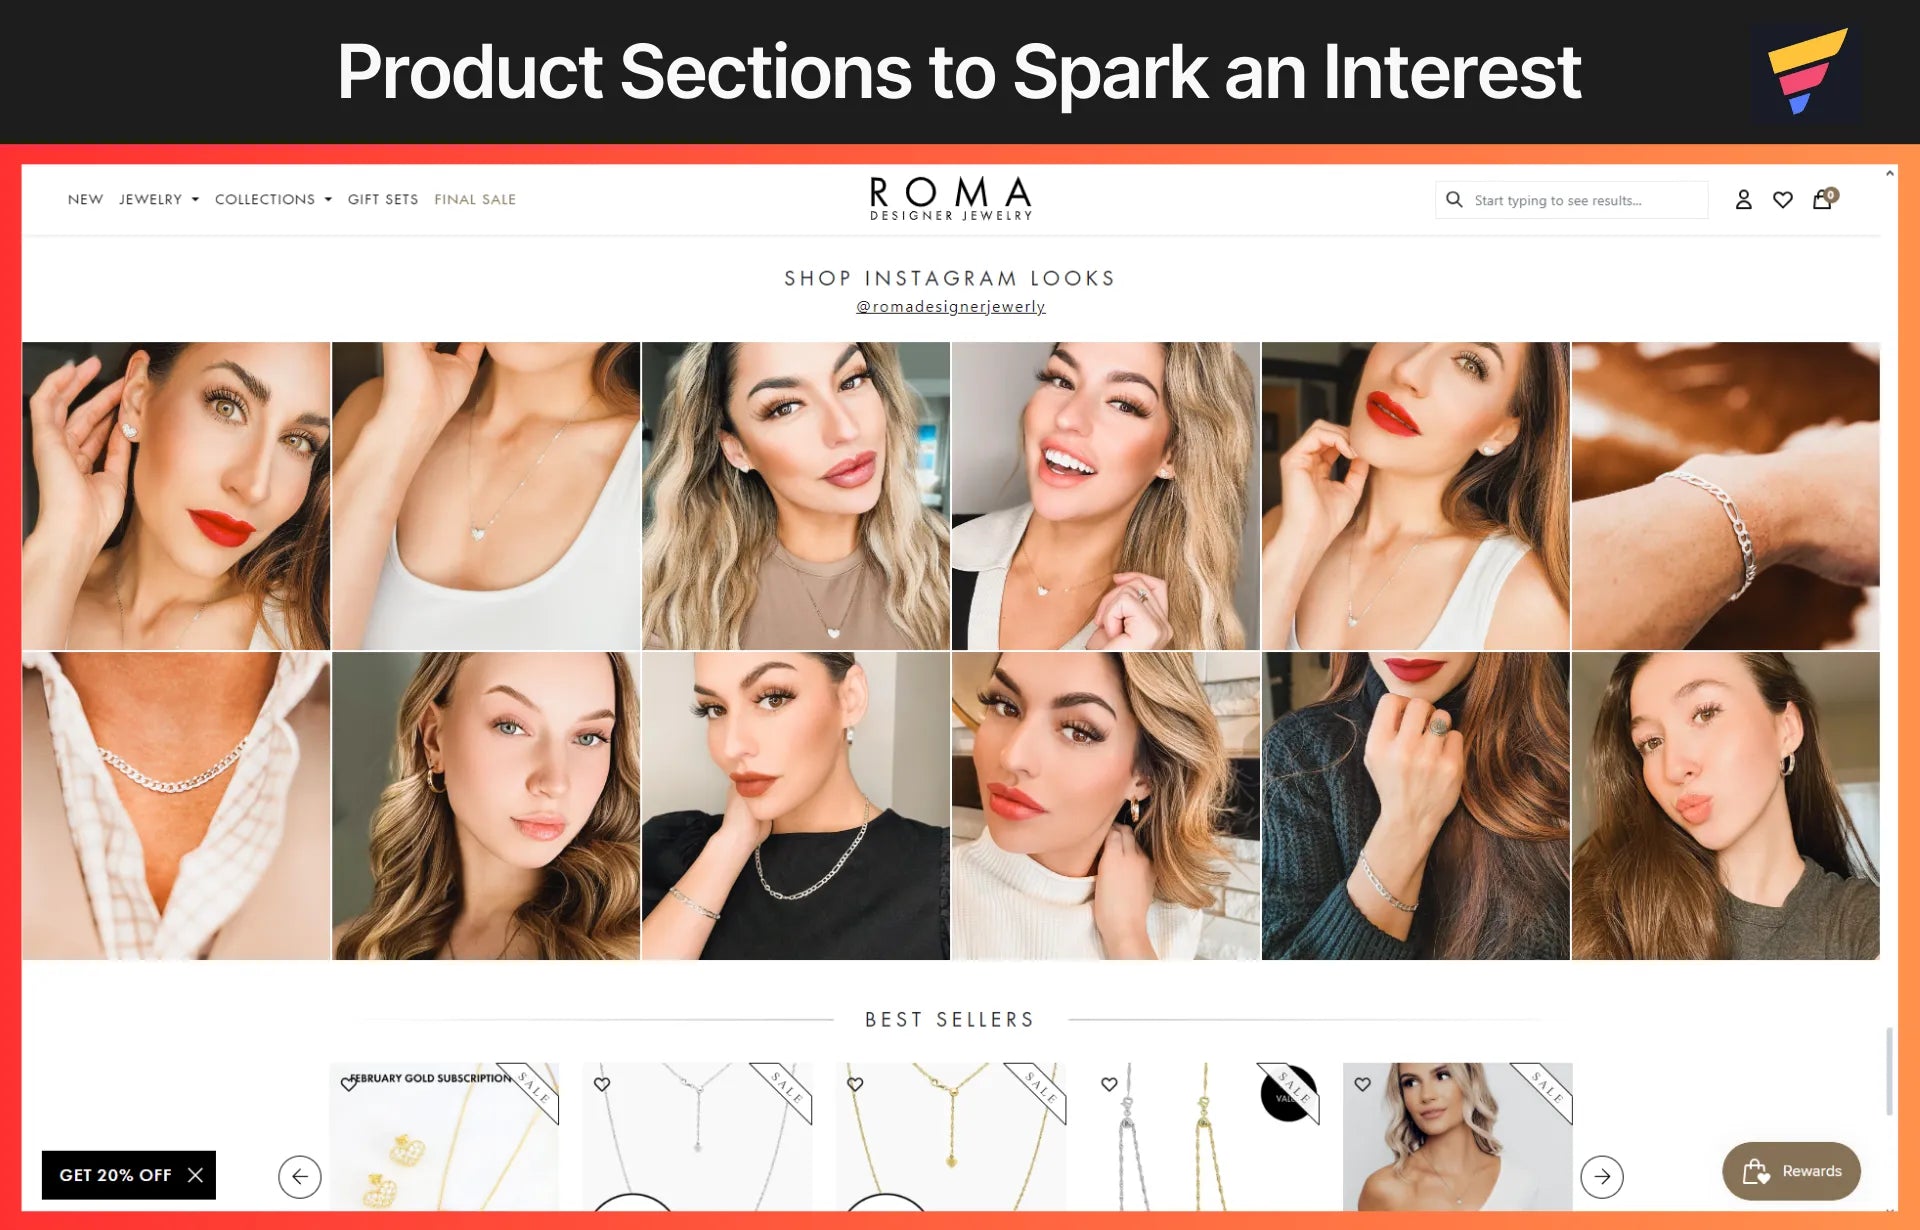 Product Sections to Spark an Interest